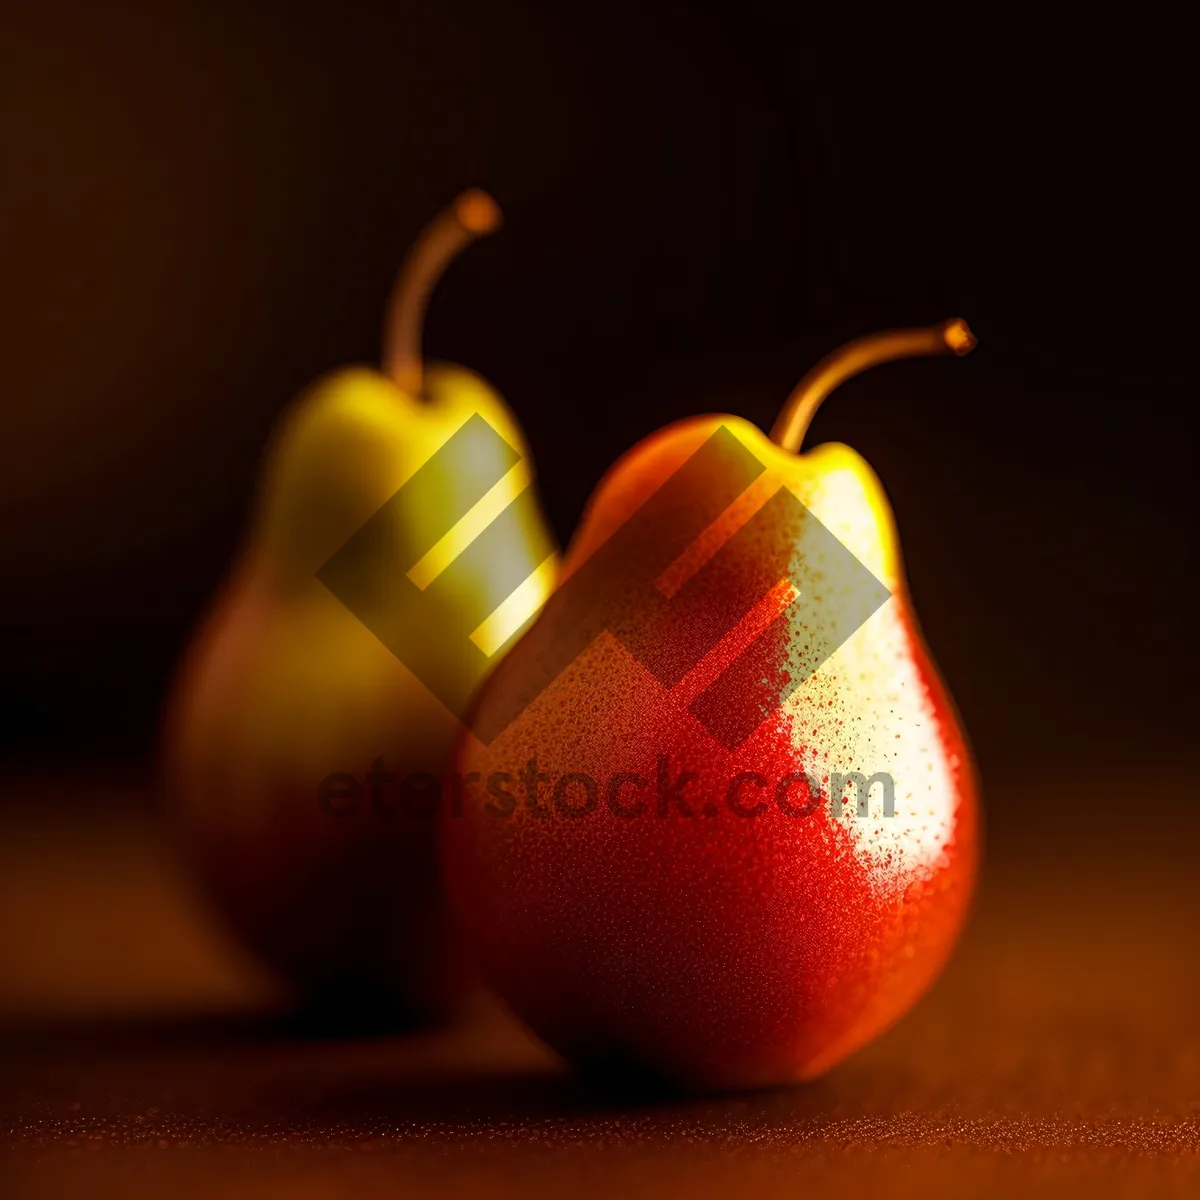 Picture of Ripe, Juicy Pear - Fresh and Nutritious Fruit